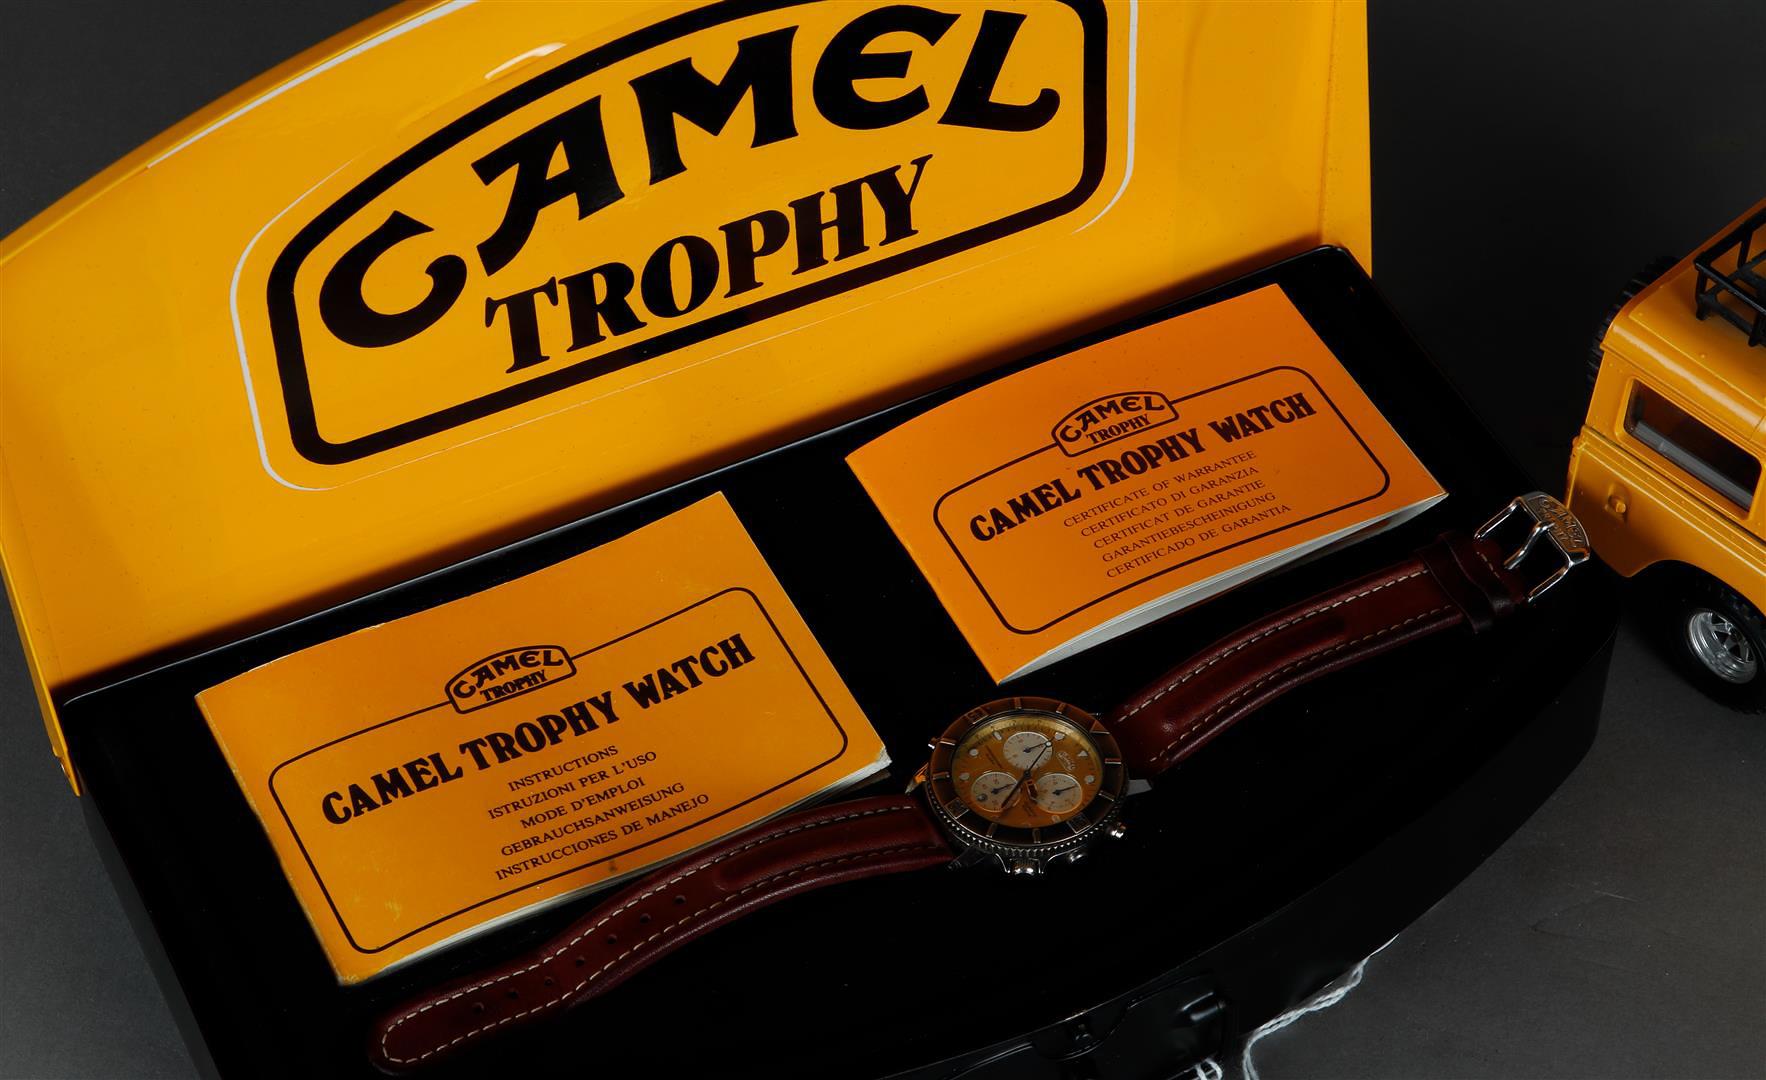 A Camel Trophy Multichrono watch, with original box and papers and advertising car. - Image 2 of 2